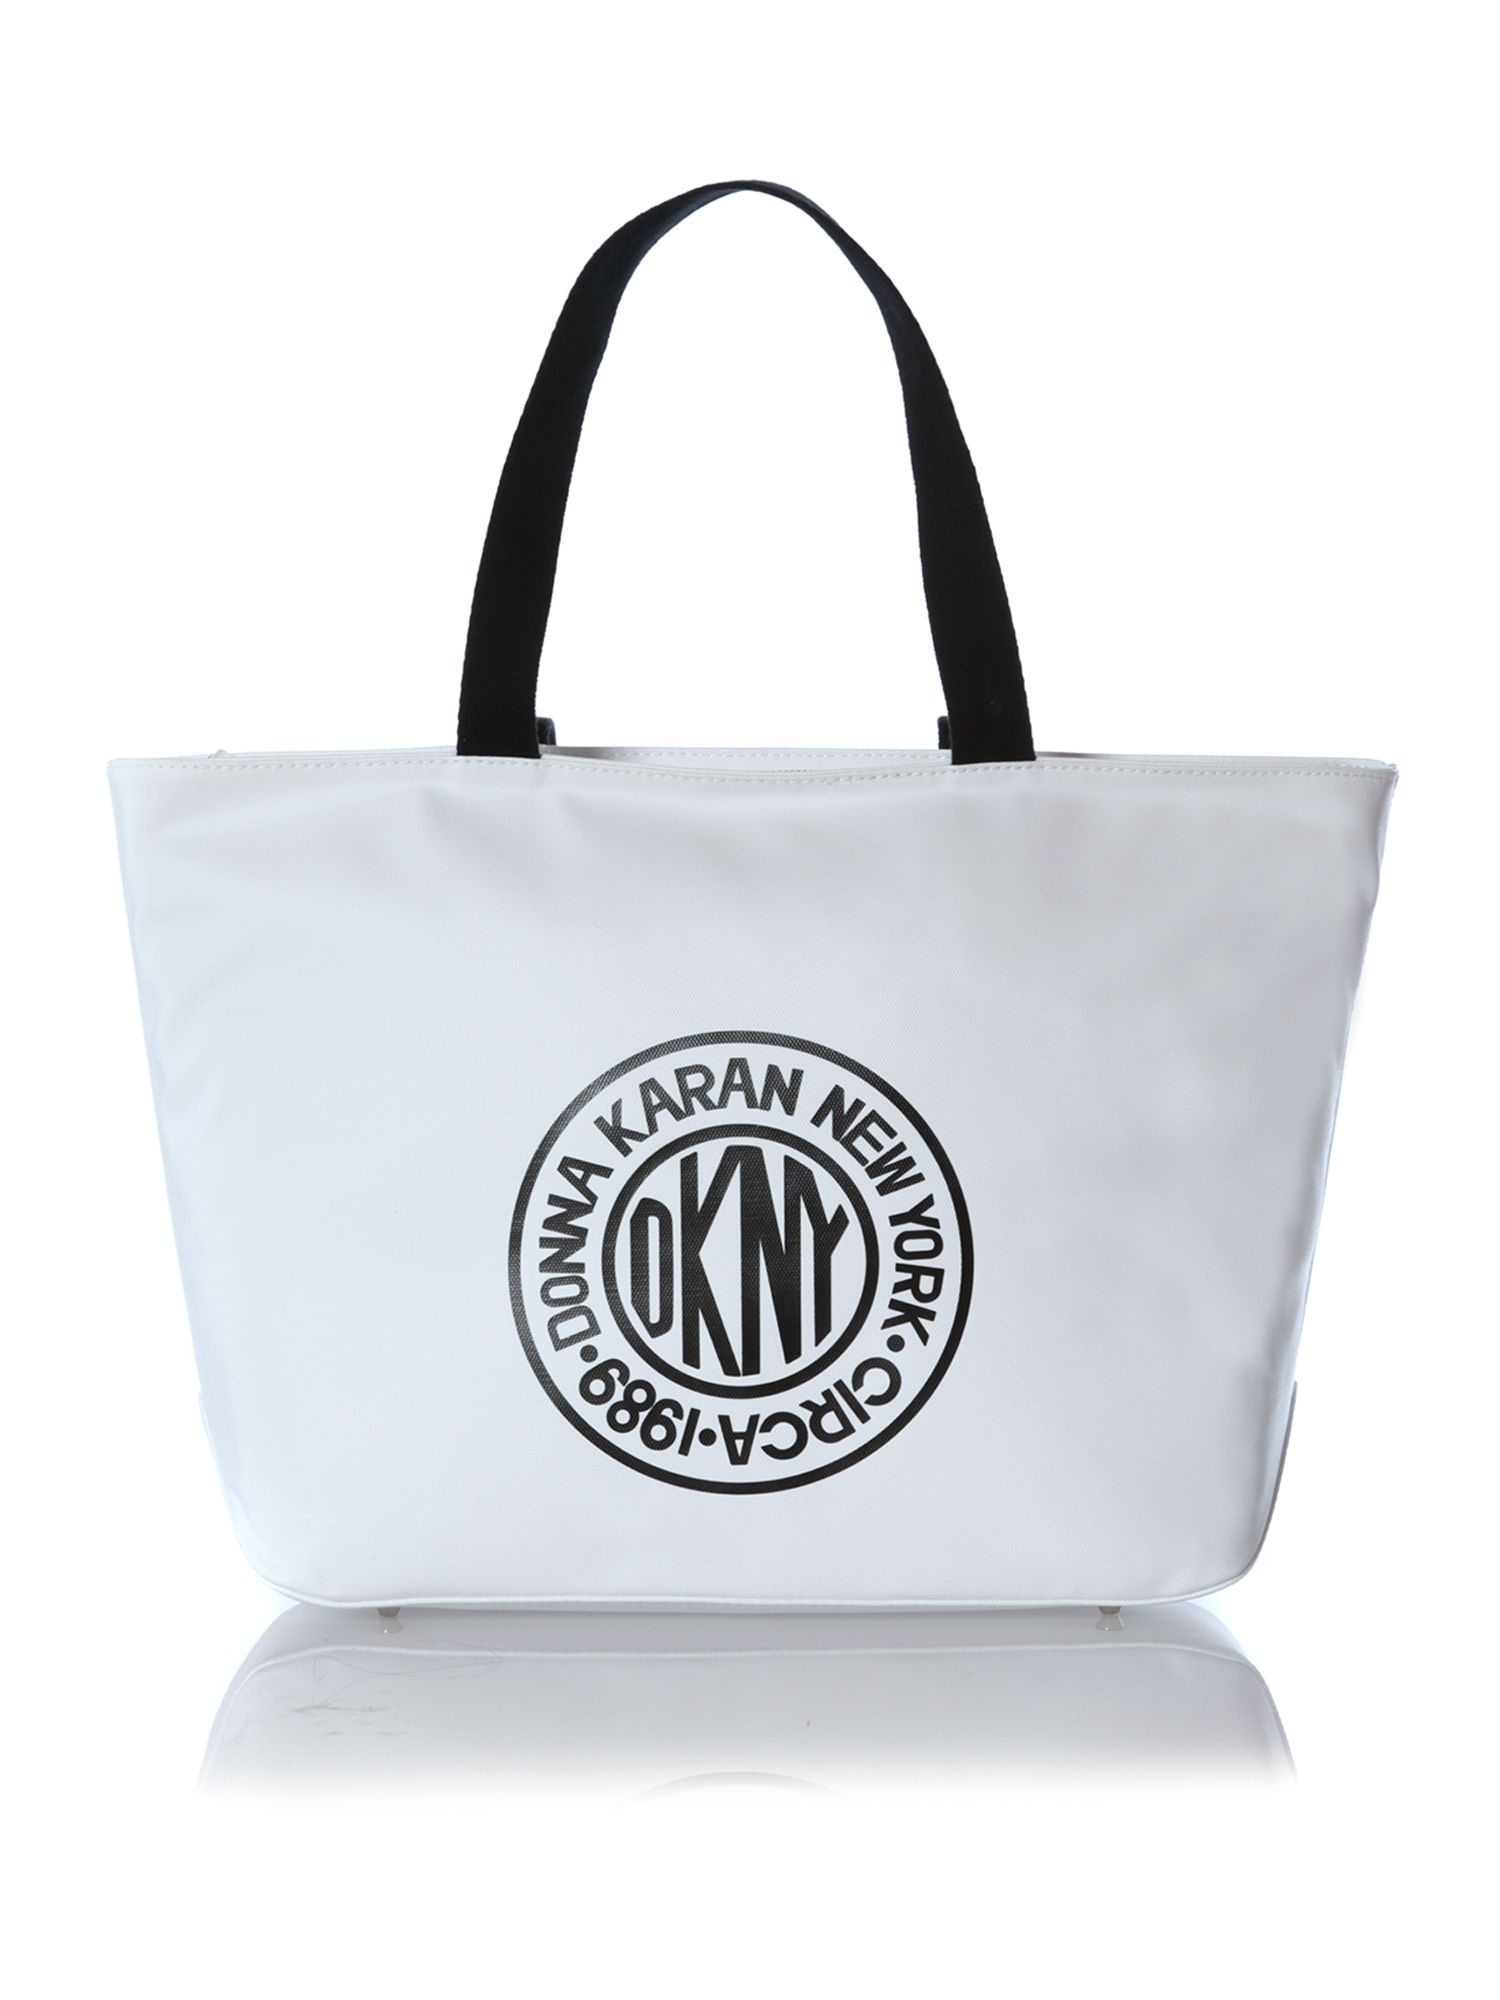 Lyst - Dkny Canvas Logo White Tote Bag in White